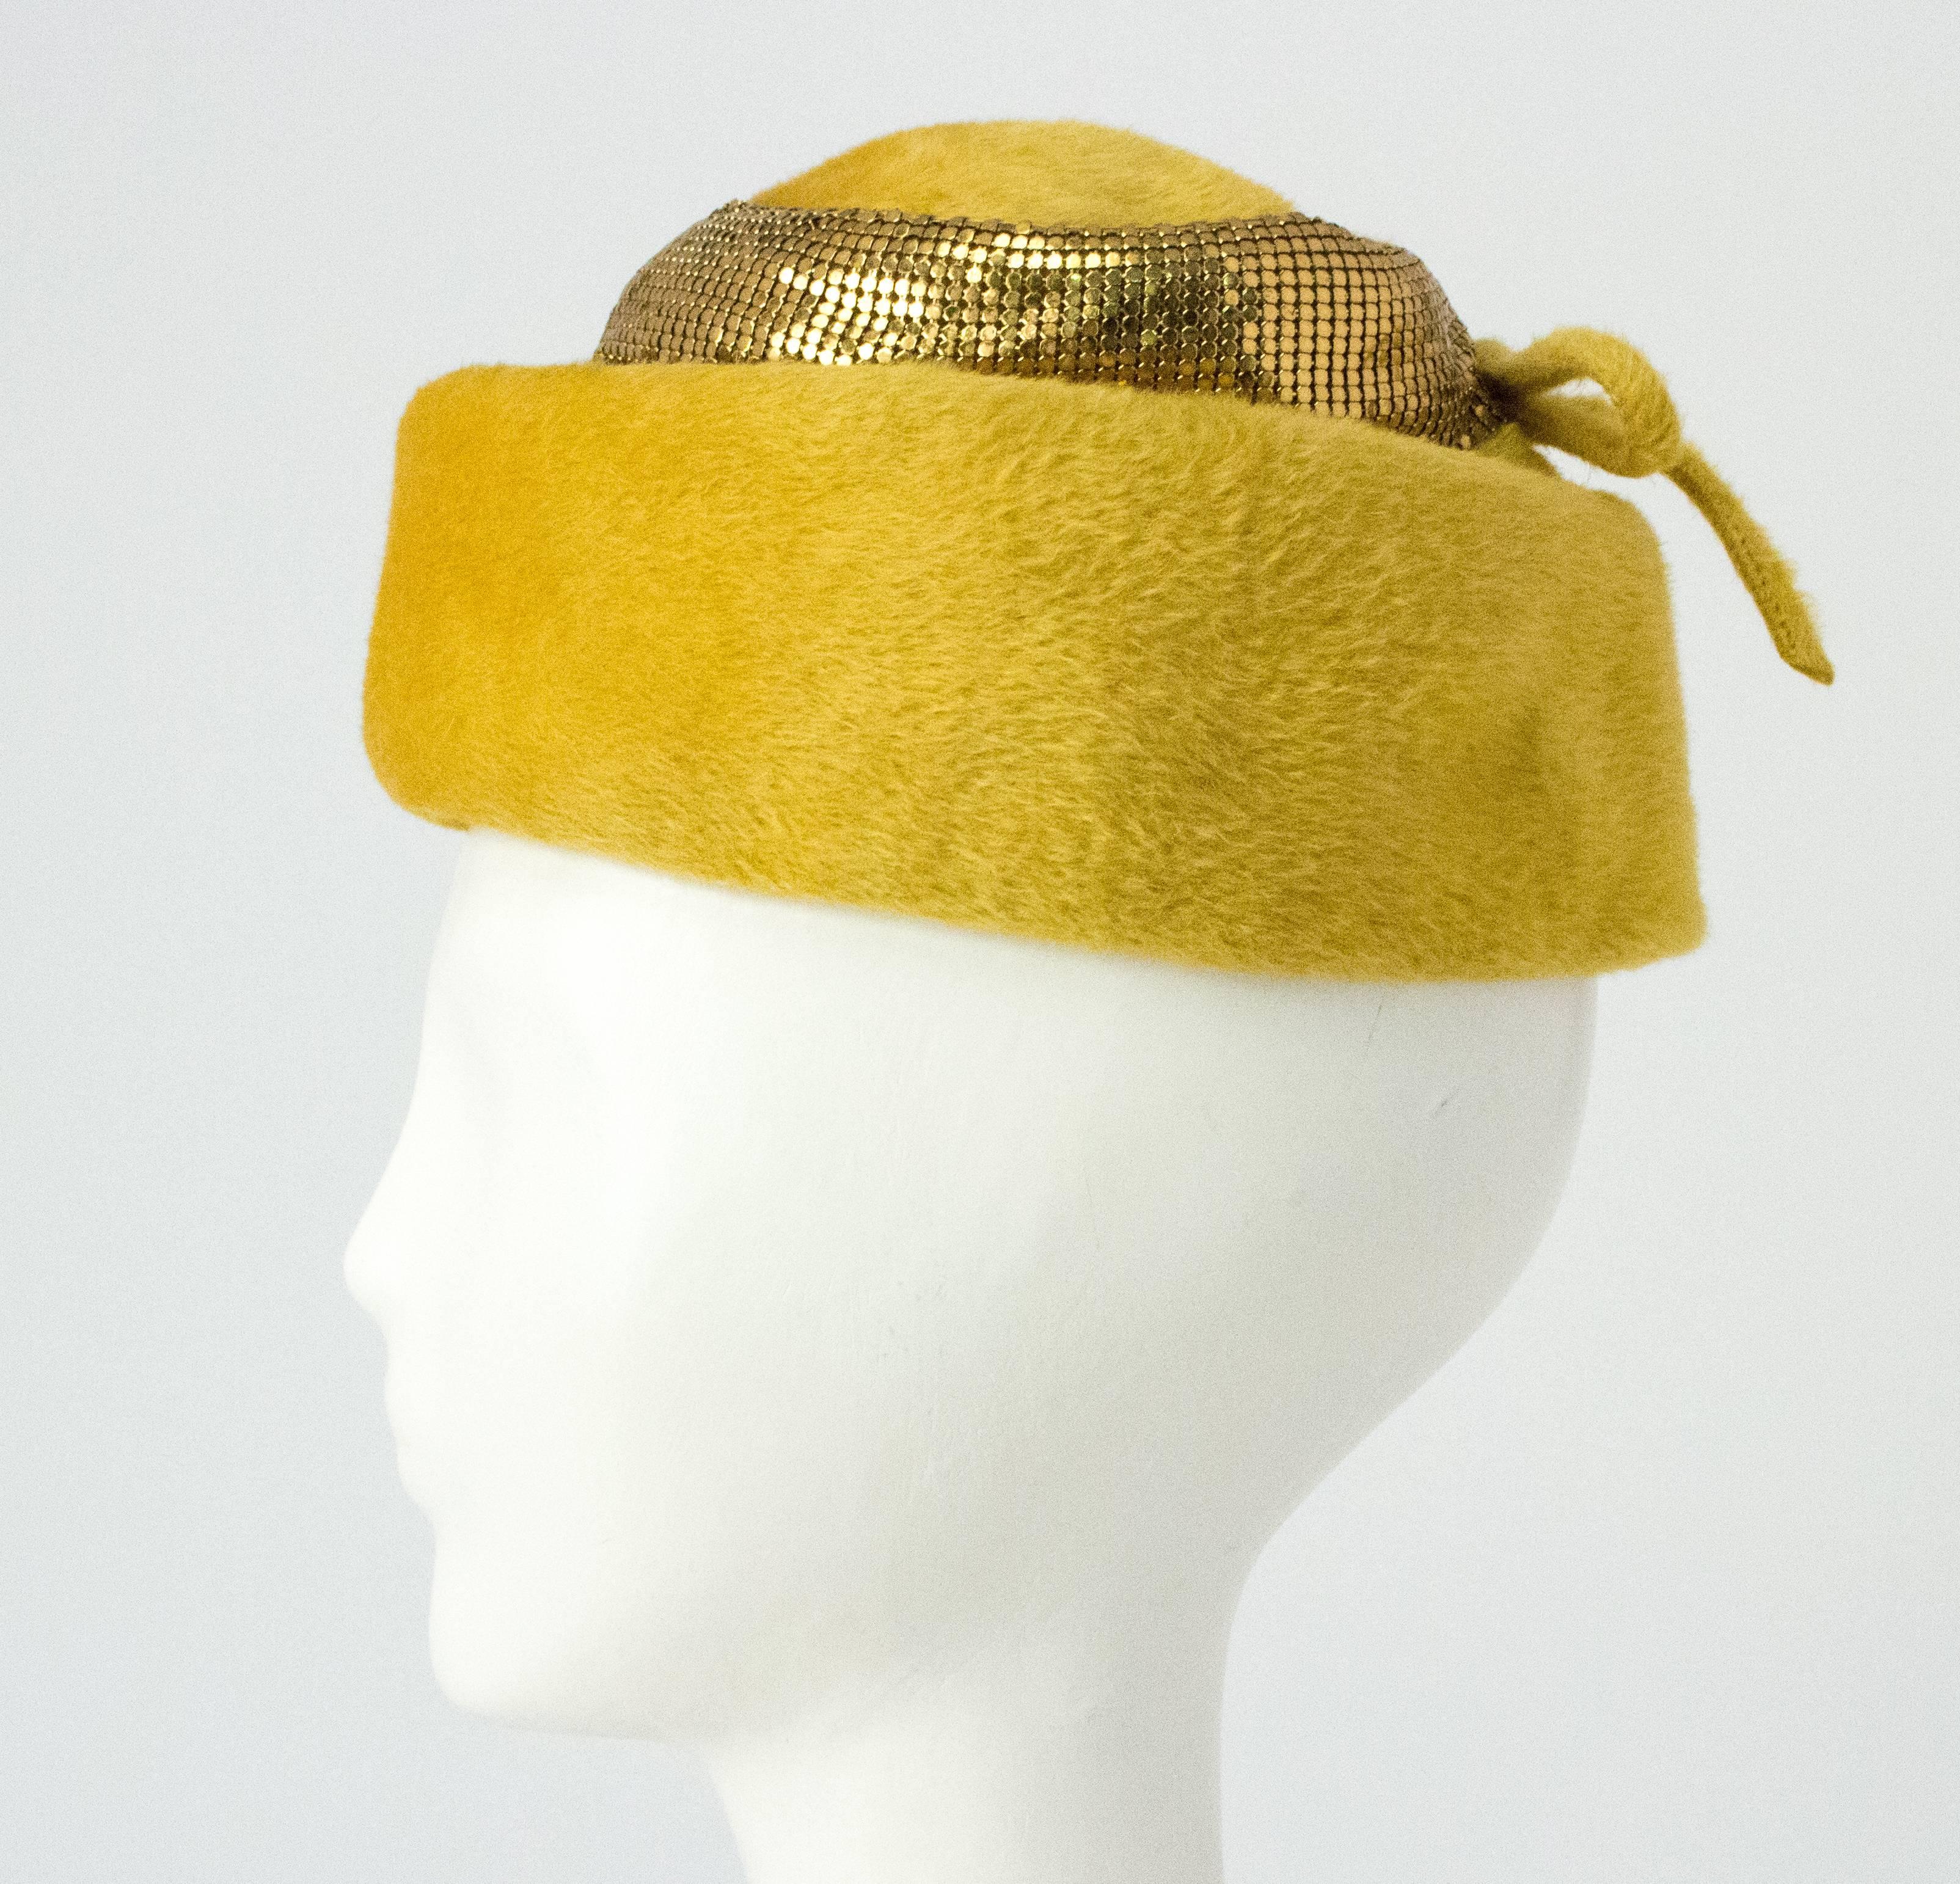  50s Leslie James Mustard Structured Hat with Metal Mess Trim  In Good Condition For Sale In San Francisco, CA